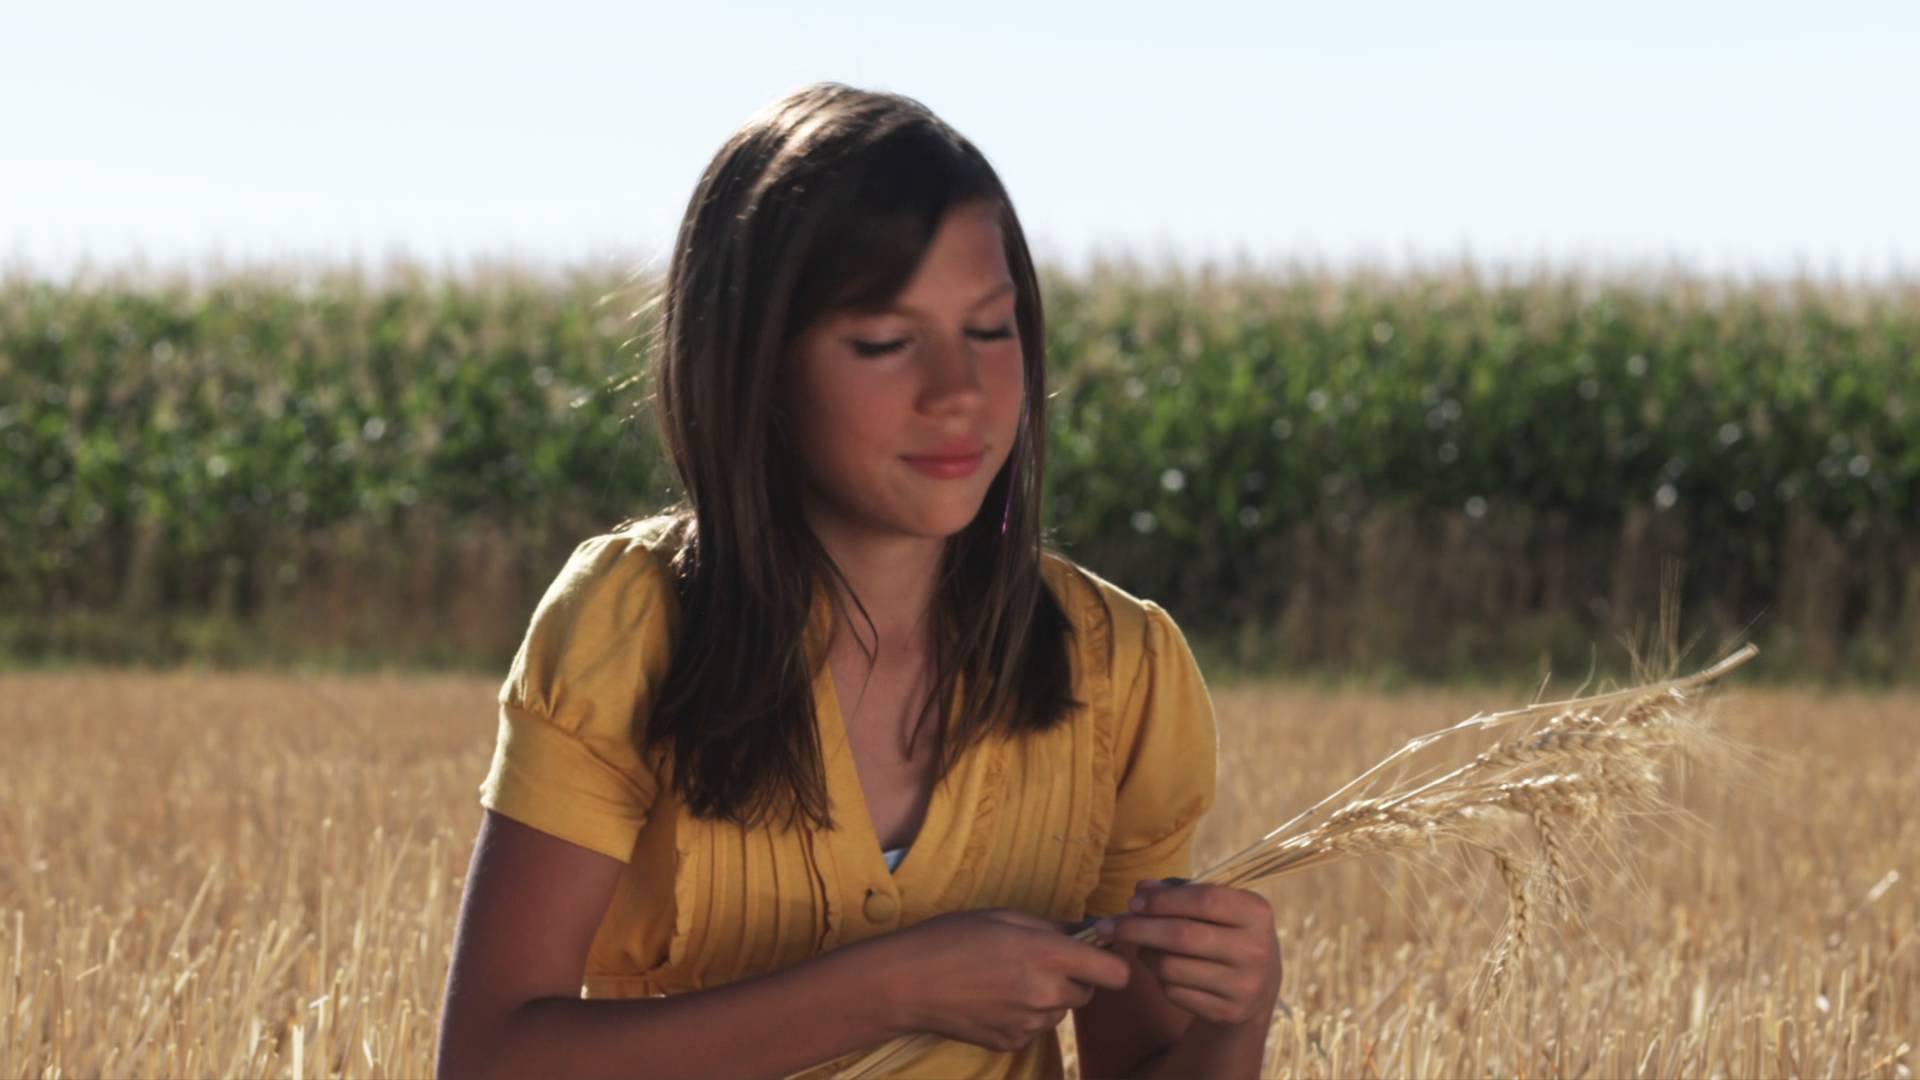 Happy woman in a wheat field holding strands of wheat - YouTube